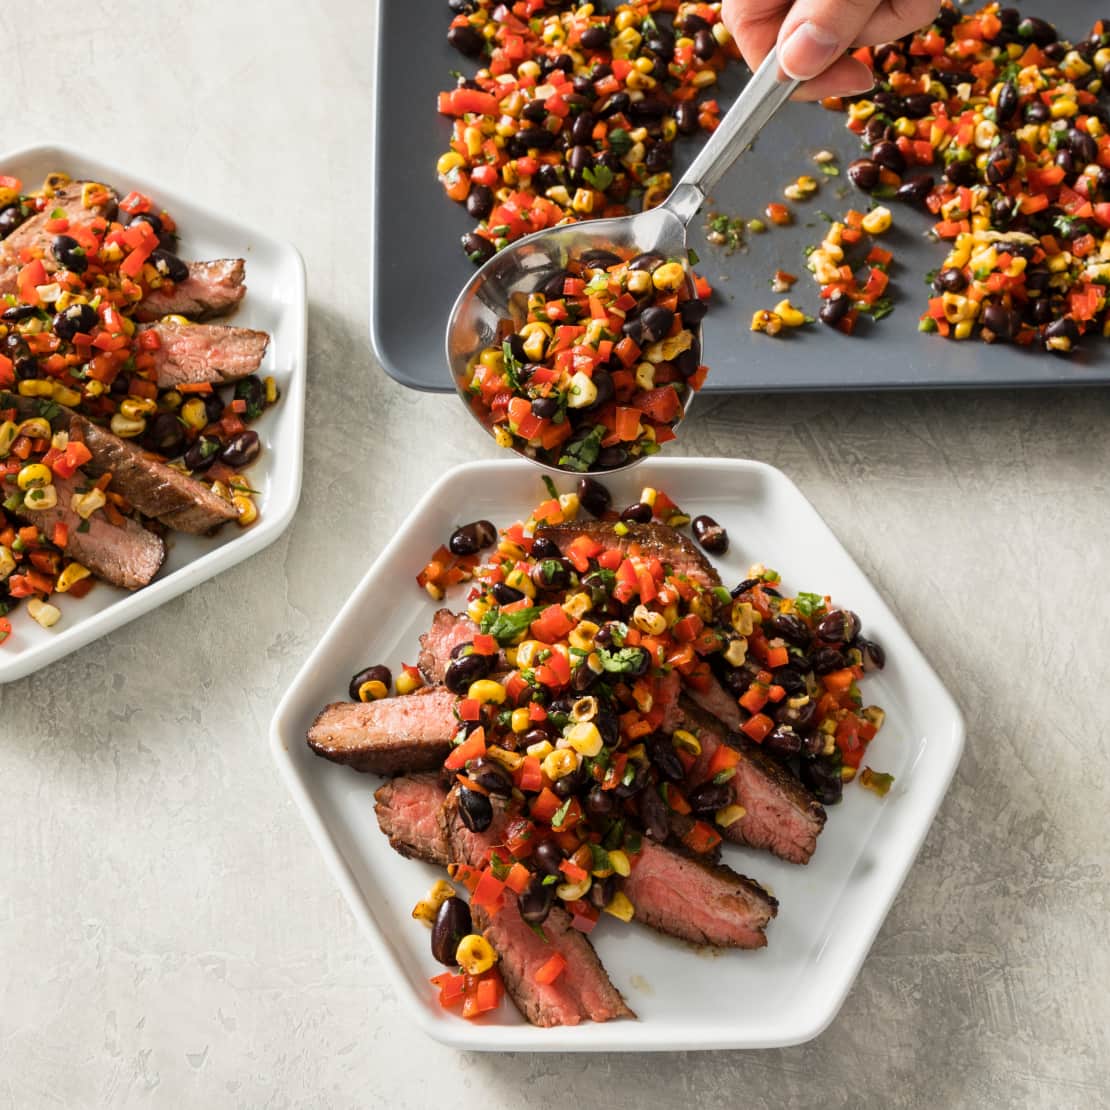 Spice-Rubbed Flank Steak with Spicy Corn and Black Bean Salad for Two